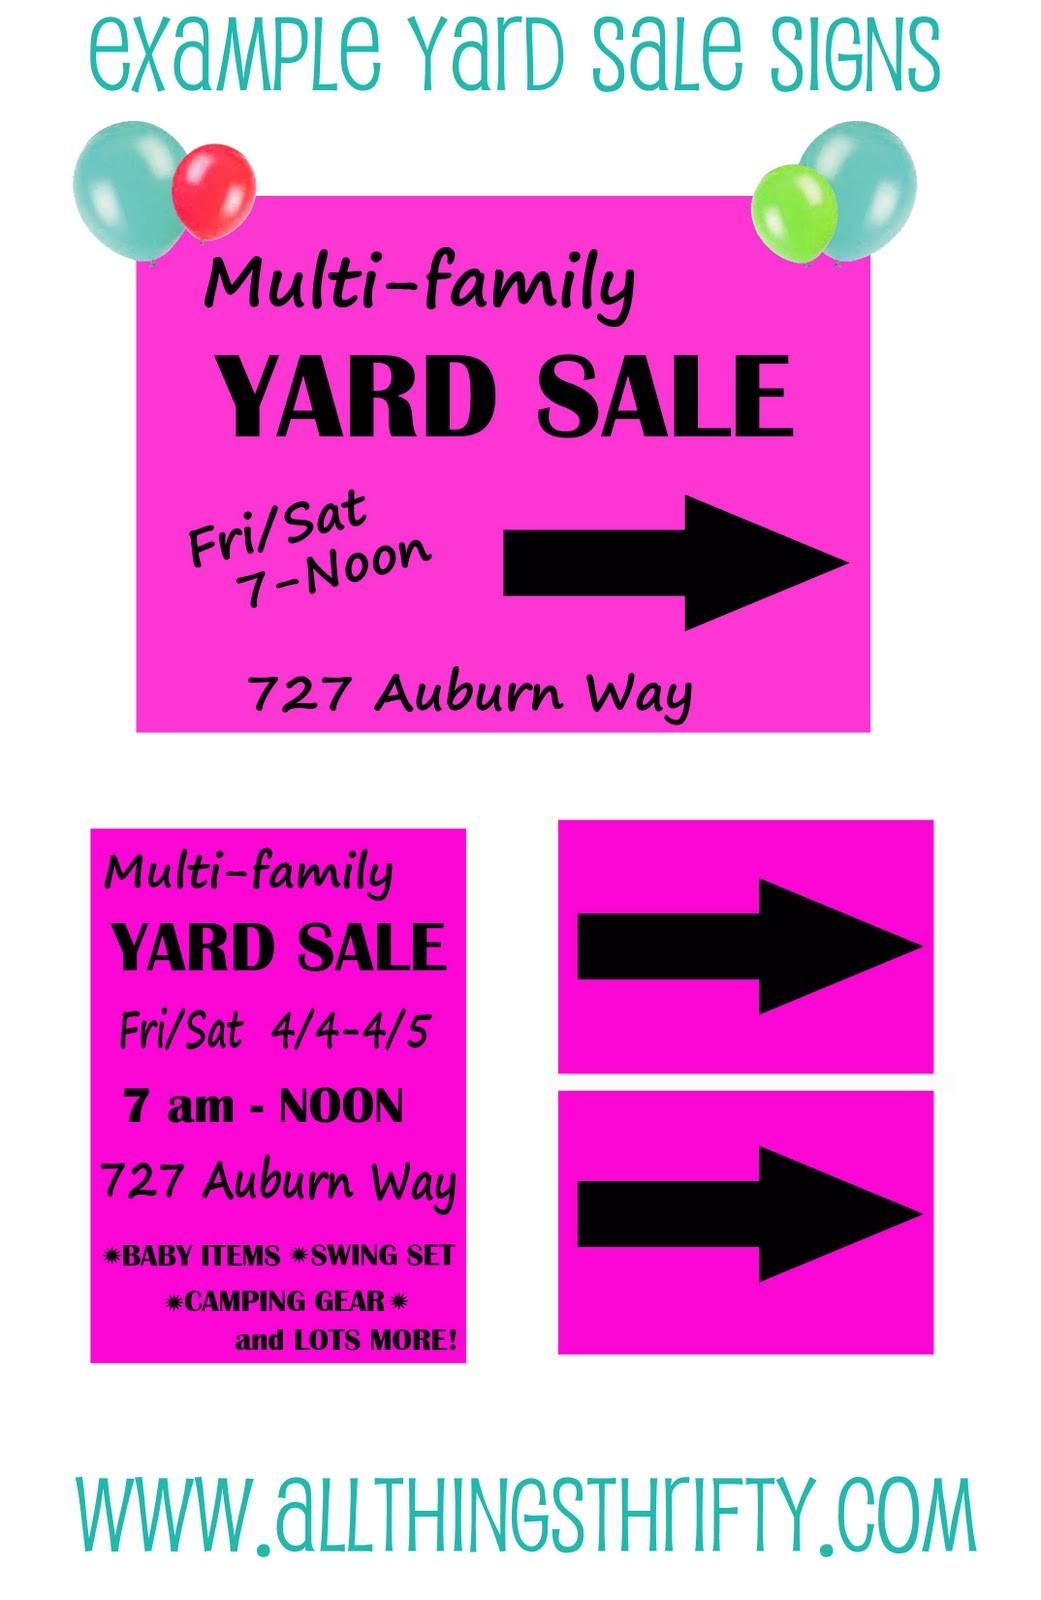 Top 15 Yard Sale Advertising Tips All Things Thrifty Document Ad Examples